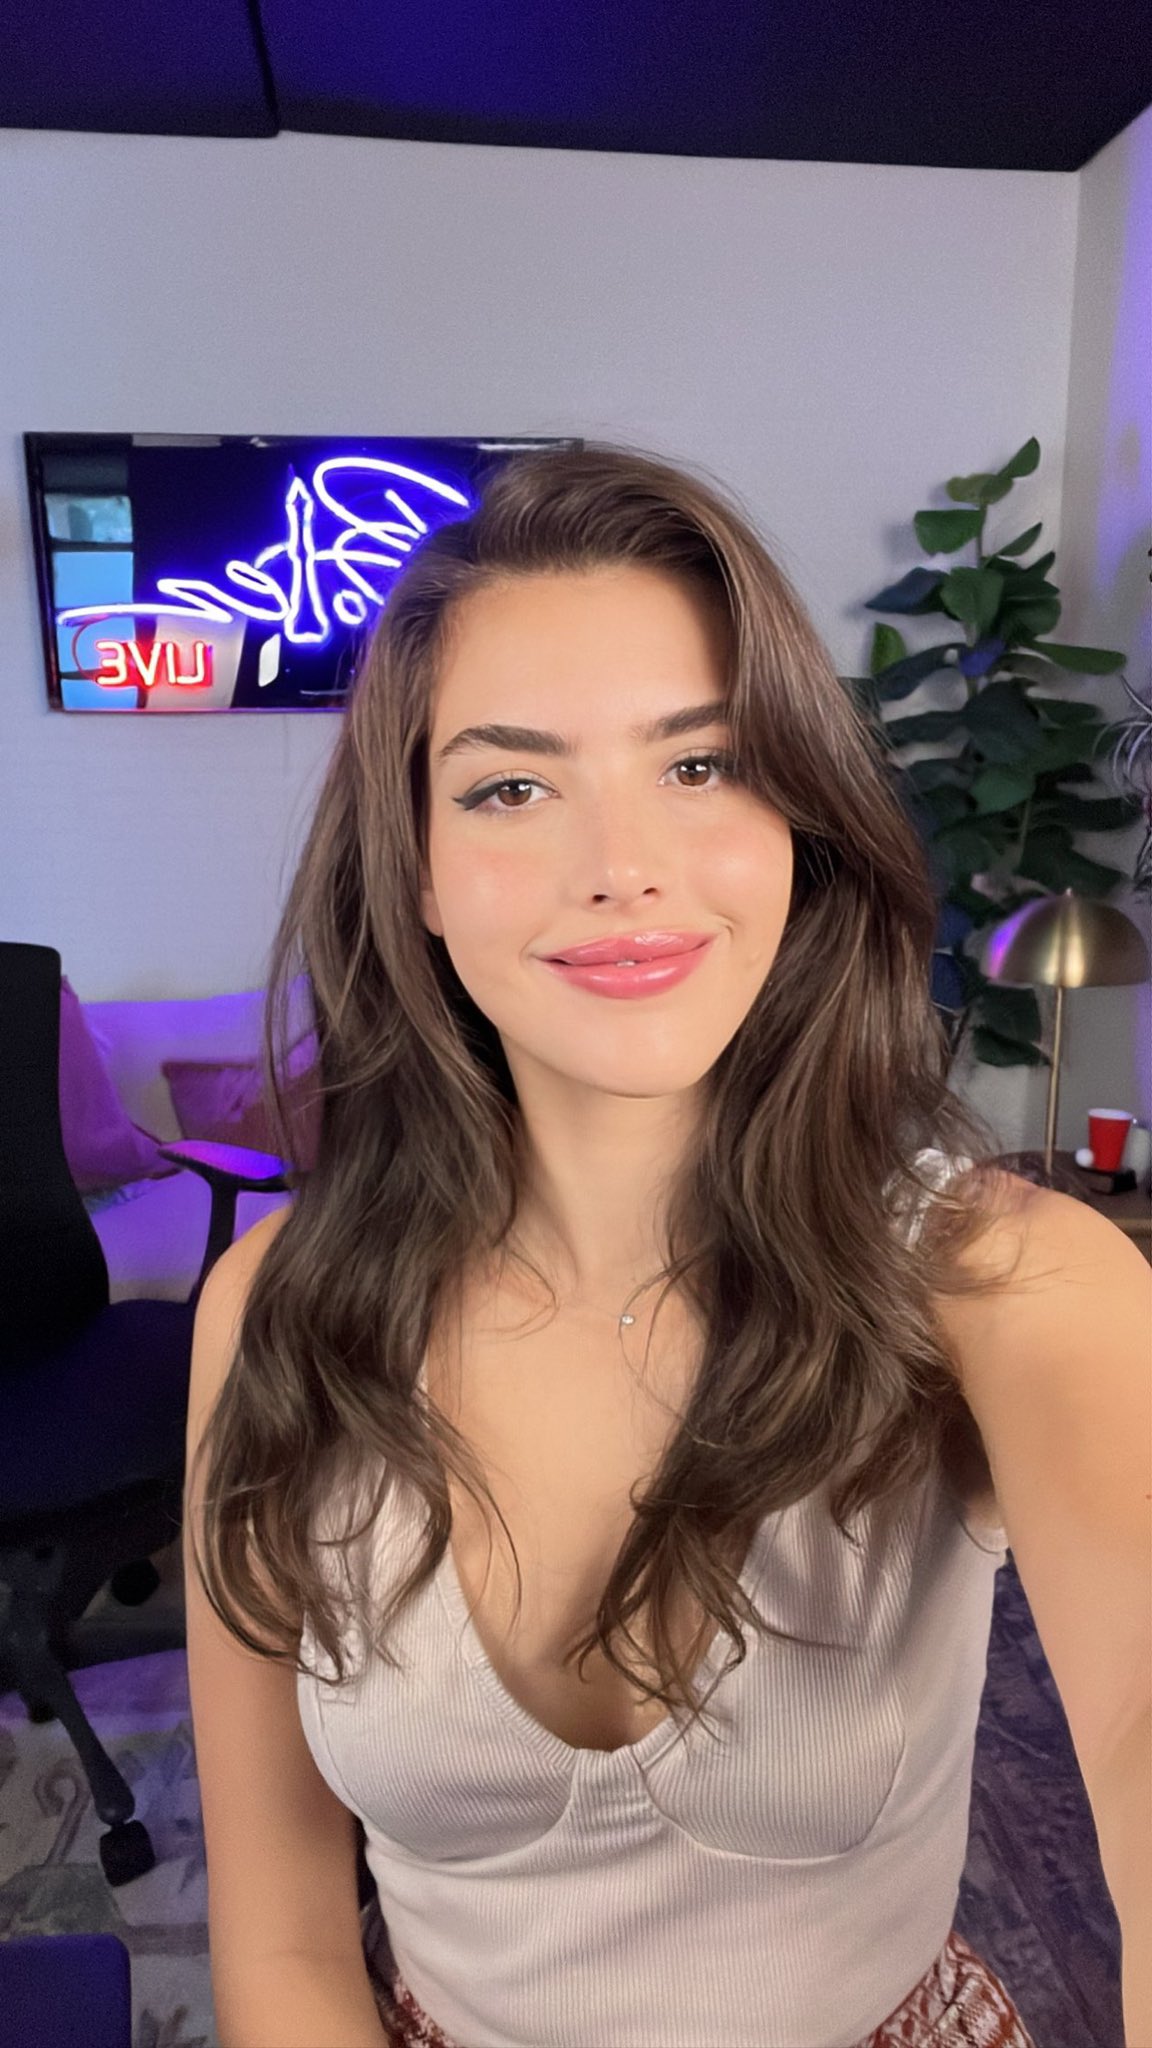 Alexandra Botez is taking the chess world by storm—live on Twitch